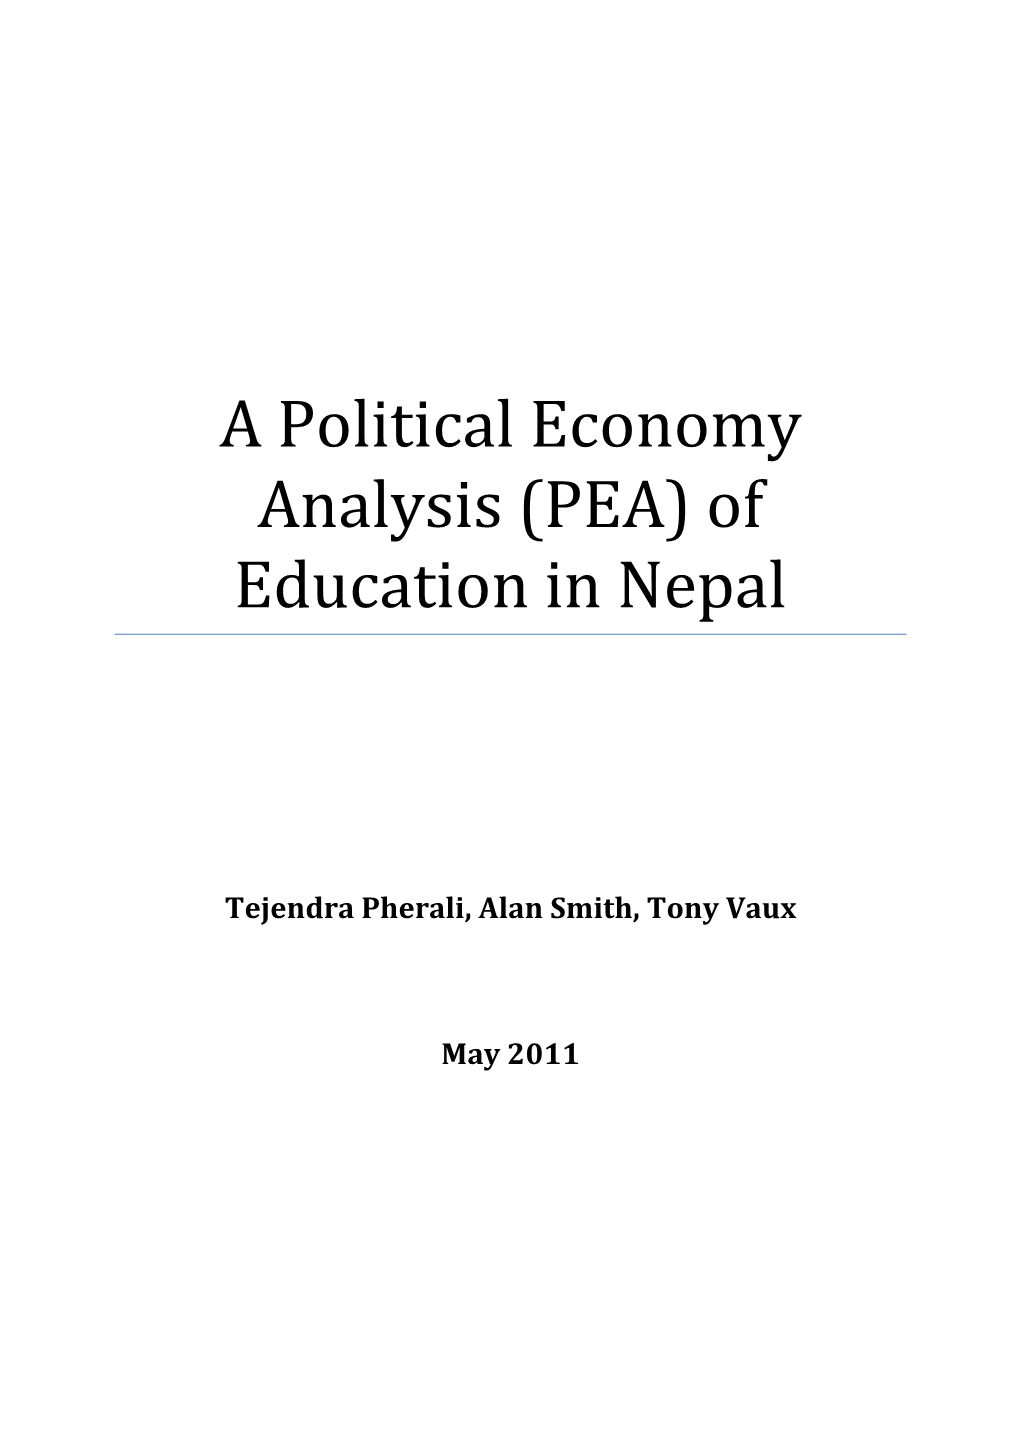 (PEA) of Education in Nepal